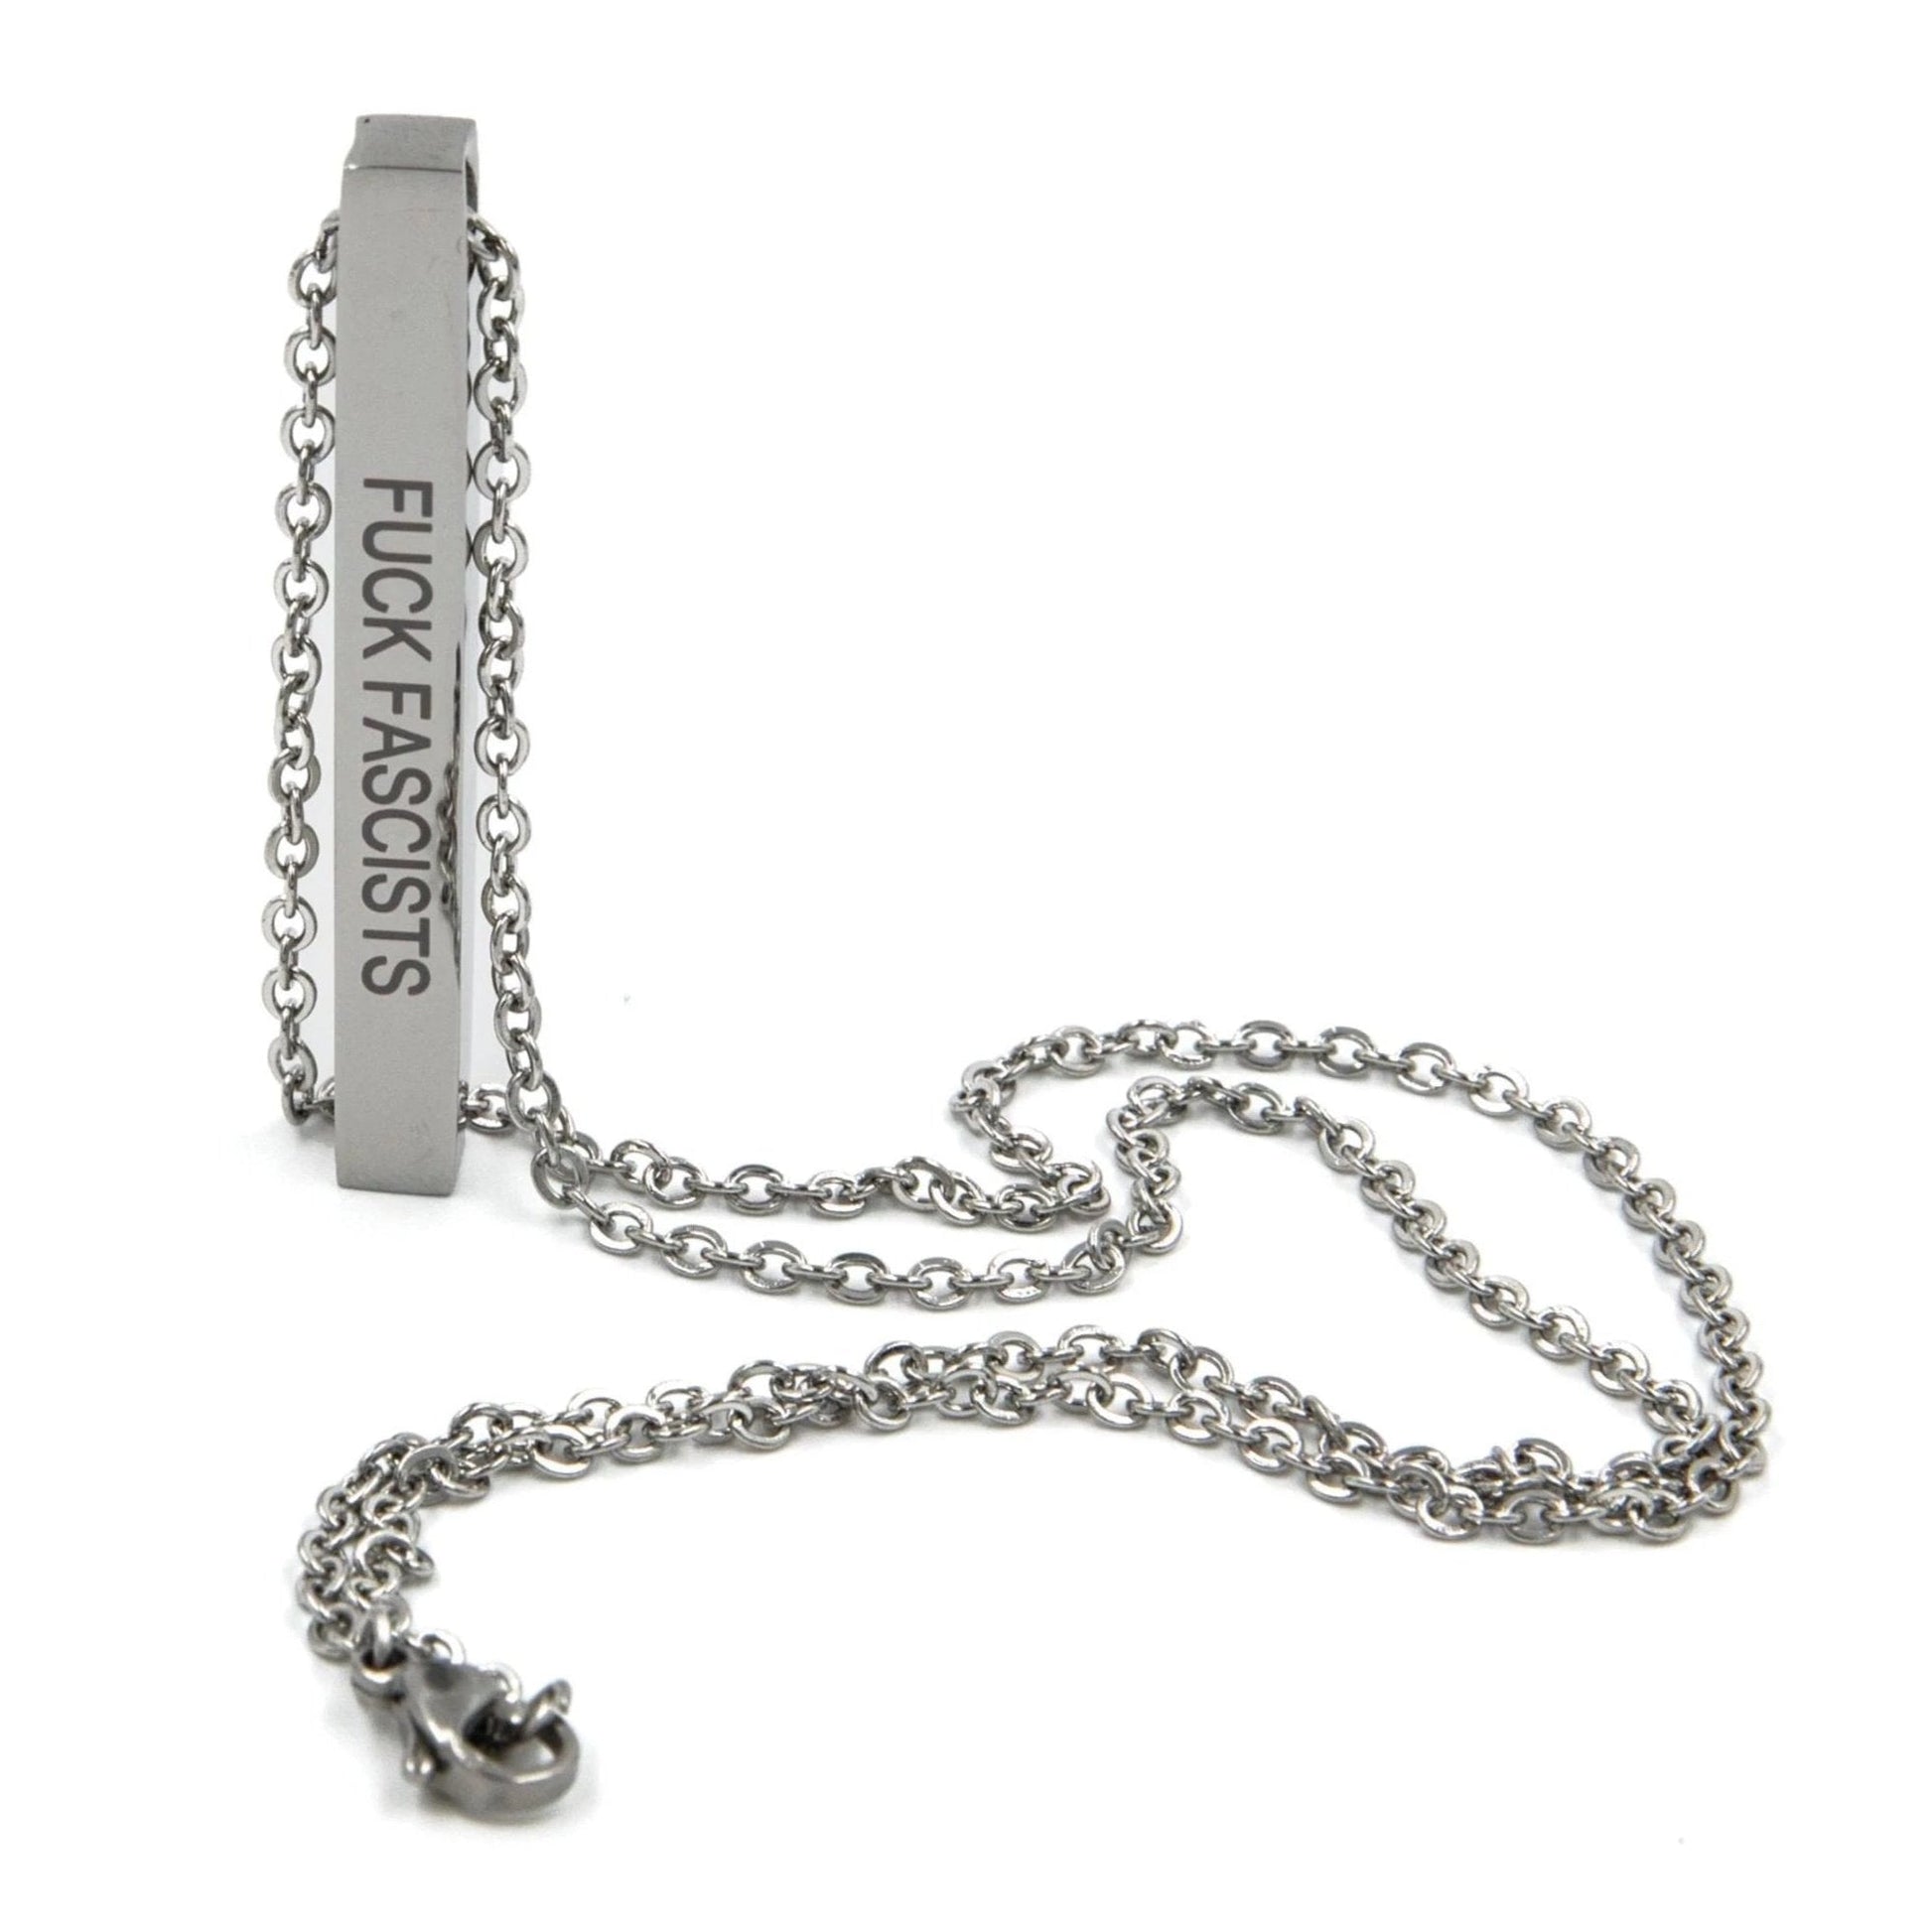 Burn the Patriarchy 🔥 Fuck Fascists Stainless Steel Bar Necklace | Minimalist Feminism Pendant Engraved on Two Sides